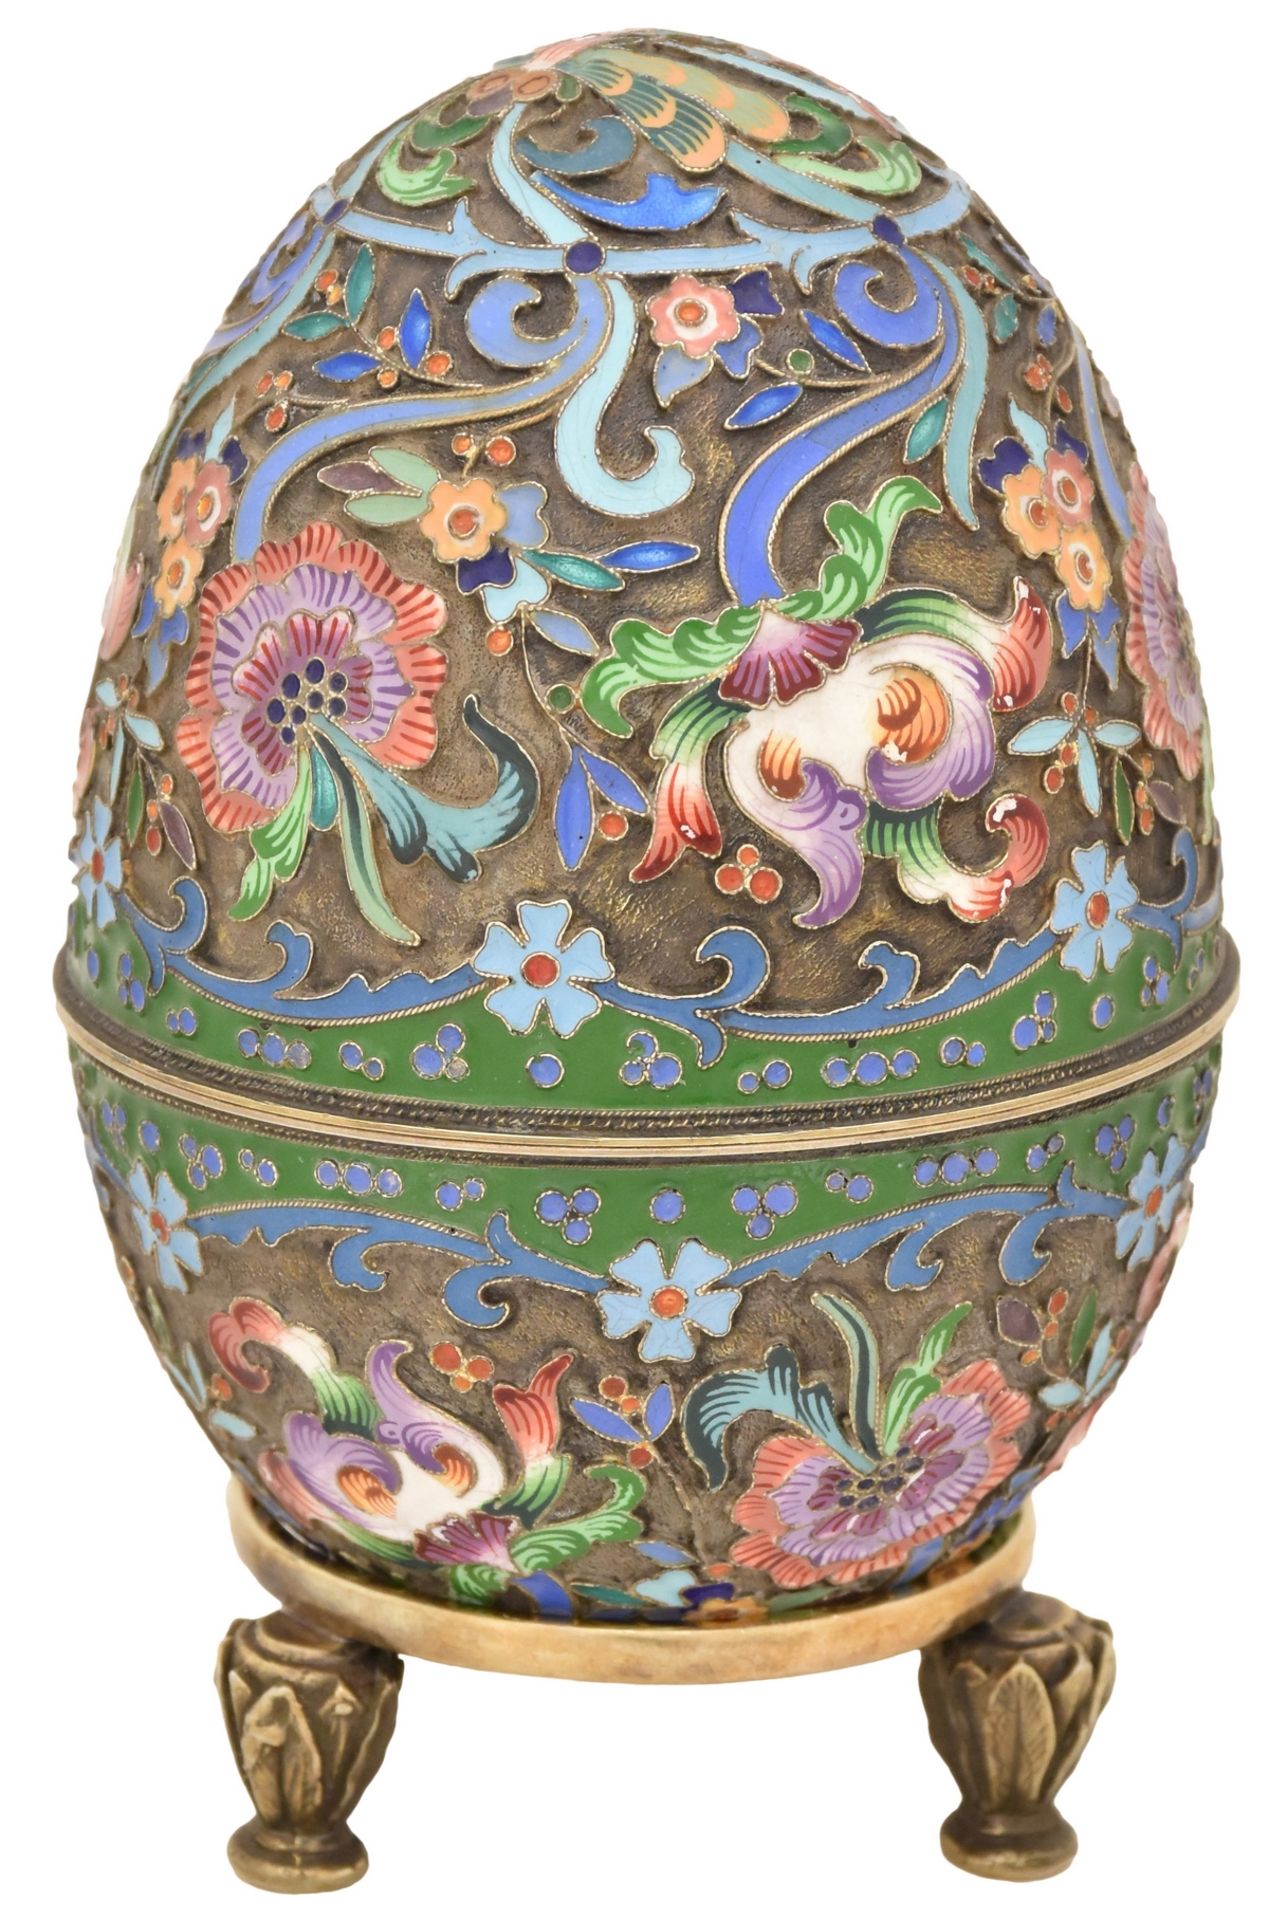 [Russian] Enamel Floral pattern Easter egg. Russia, Moscow. Circa 1910. 11x7 cm (egg).